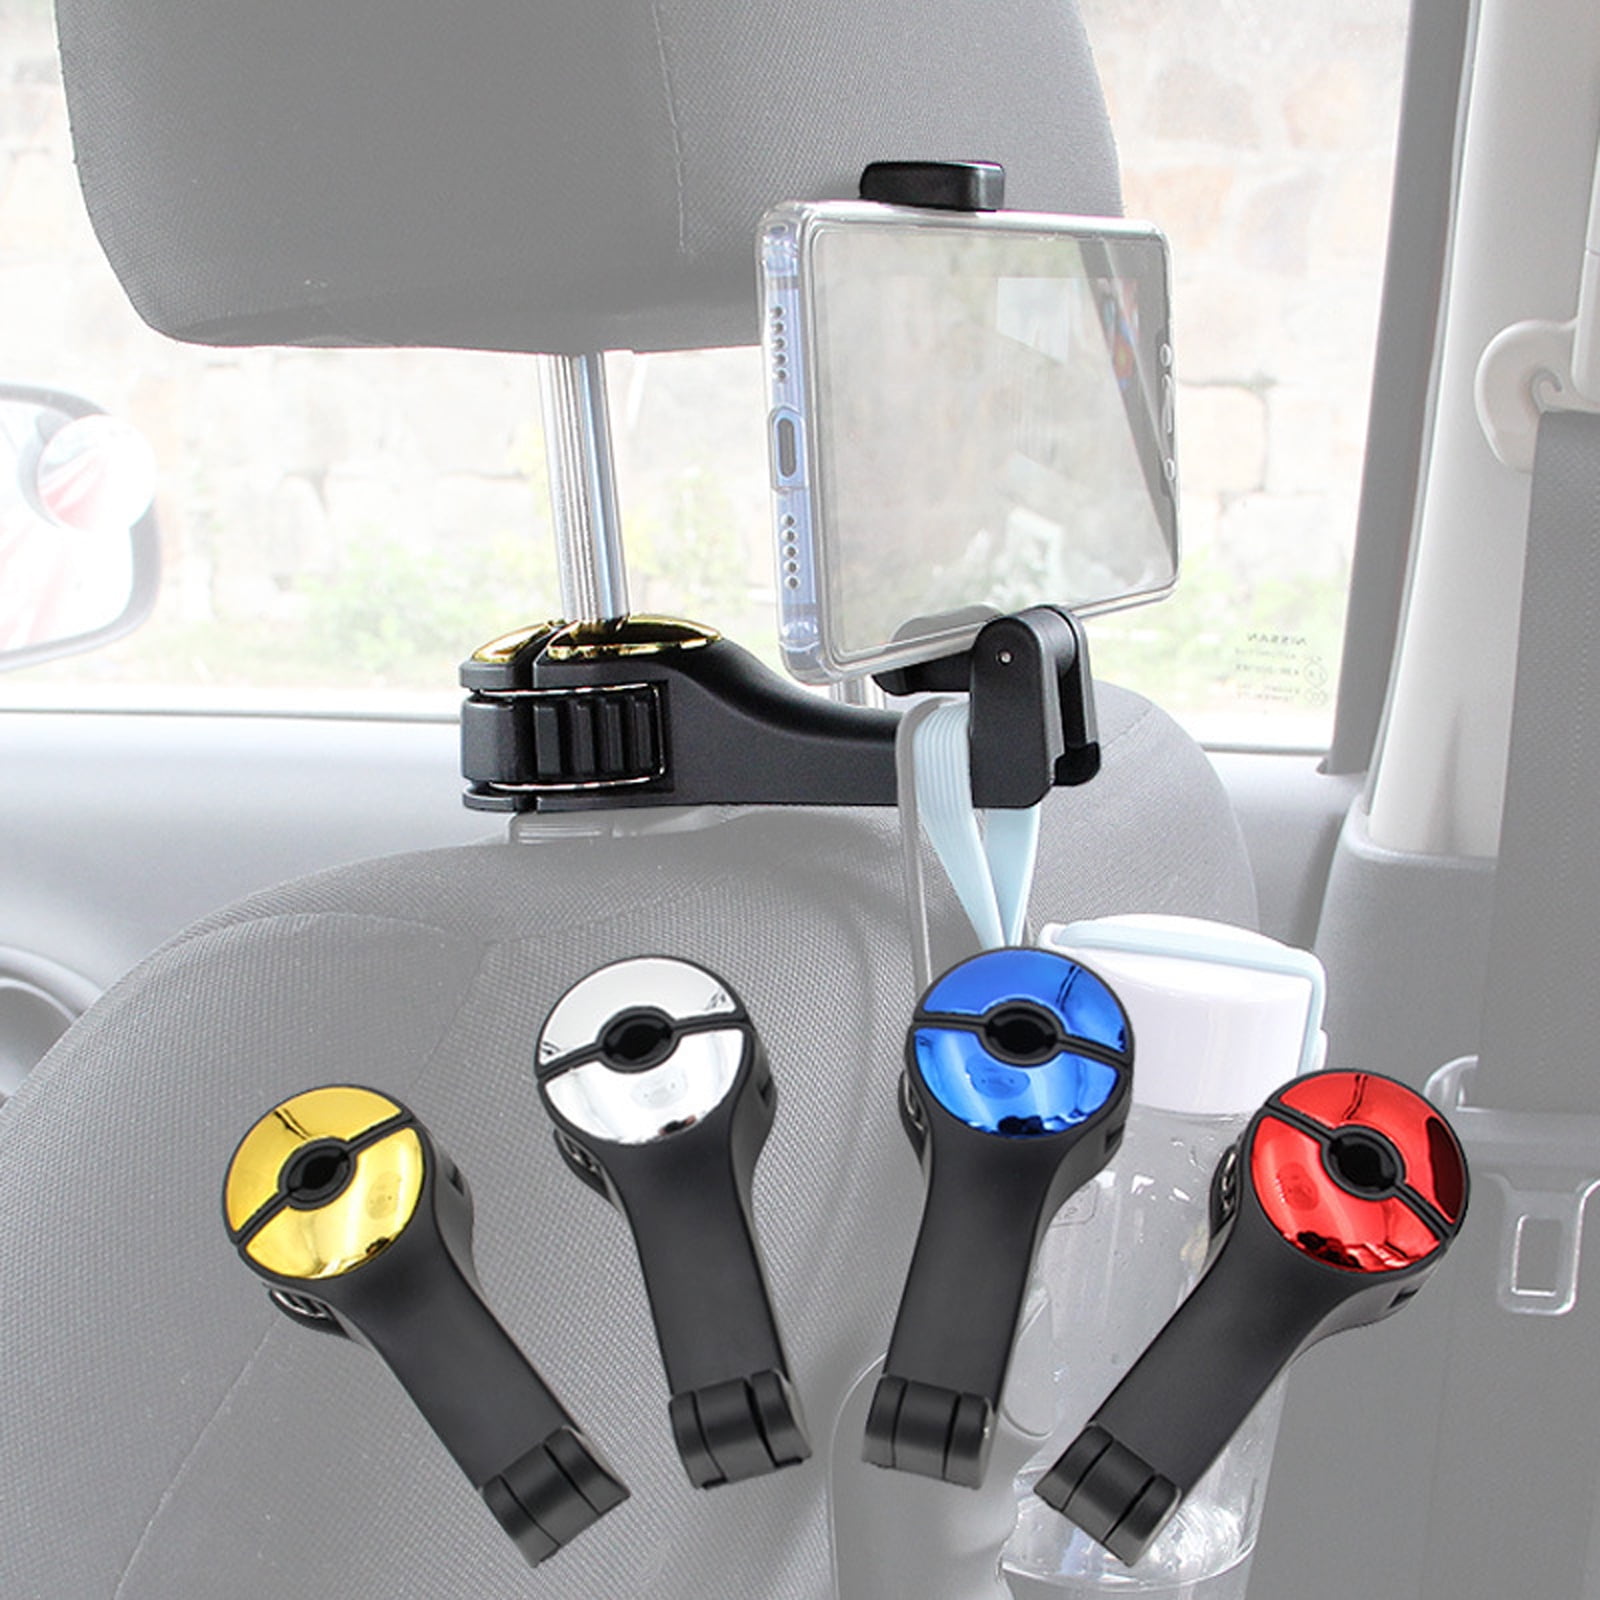 Shop 2 In 1 Car Headrest Hidden Hook with great discounts and prices online  - Oct 2023